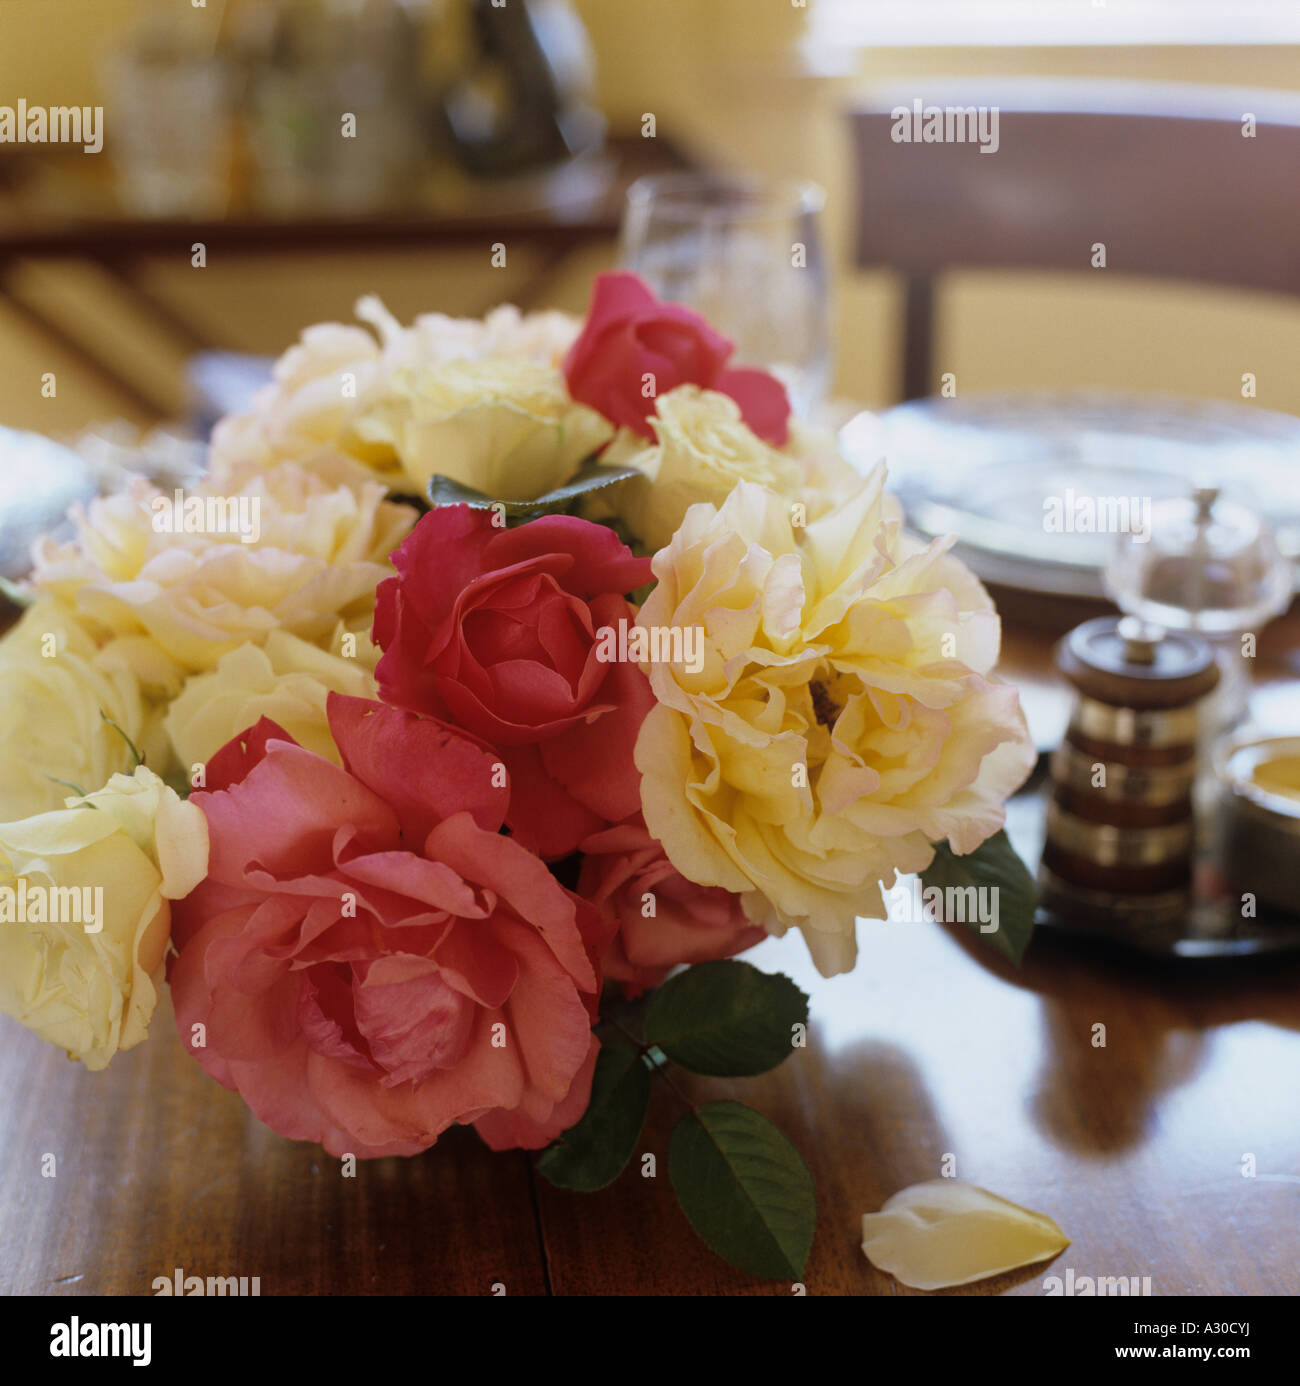 Cut pink and cream rose heads on wooden dining table Stock Photo